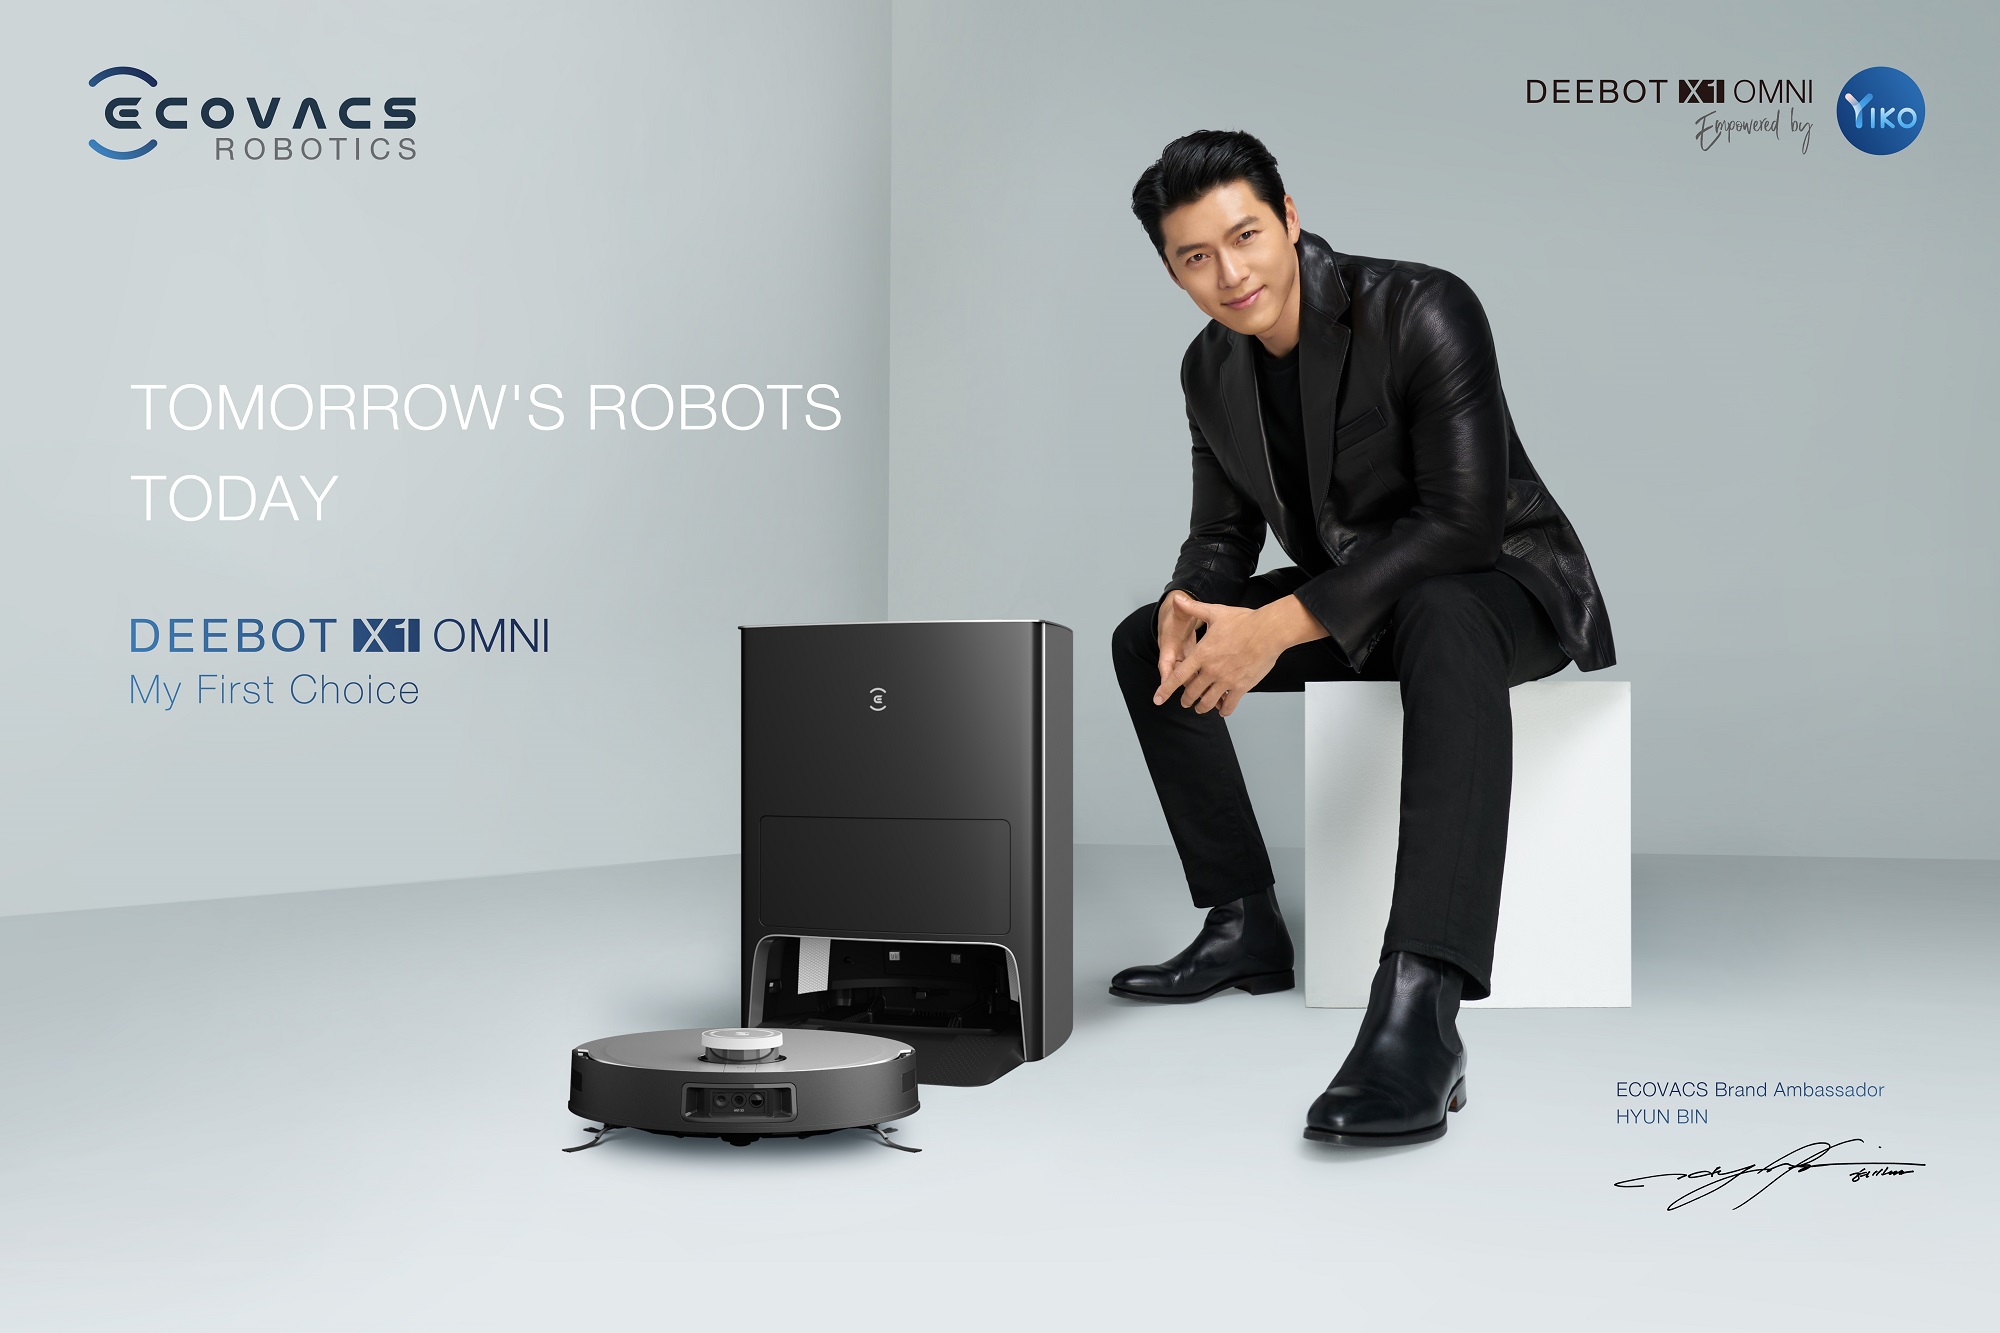 ECOVACS ROBOTICS Extends Partnership With Hyun Bin as Brand Ambassador to Launch the Brand-new All-in-one Vacuuming &amp; Mopping DEEBOT X1 OMNI in Vietnam, Defines New Era of Home Service Robots